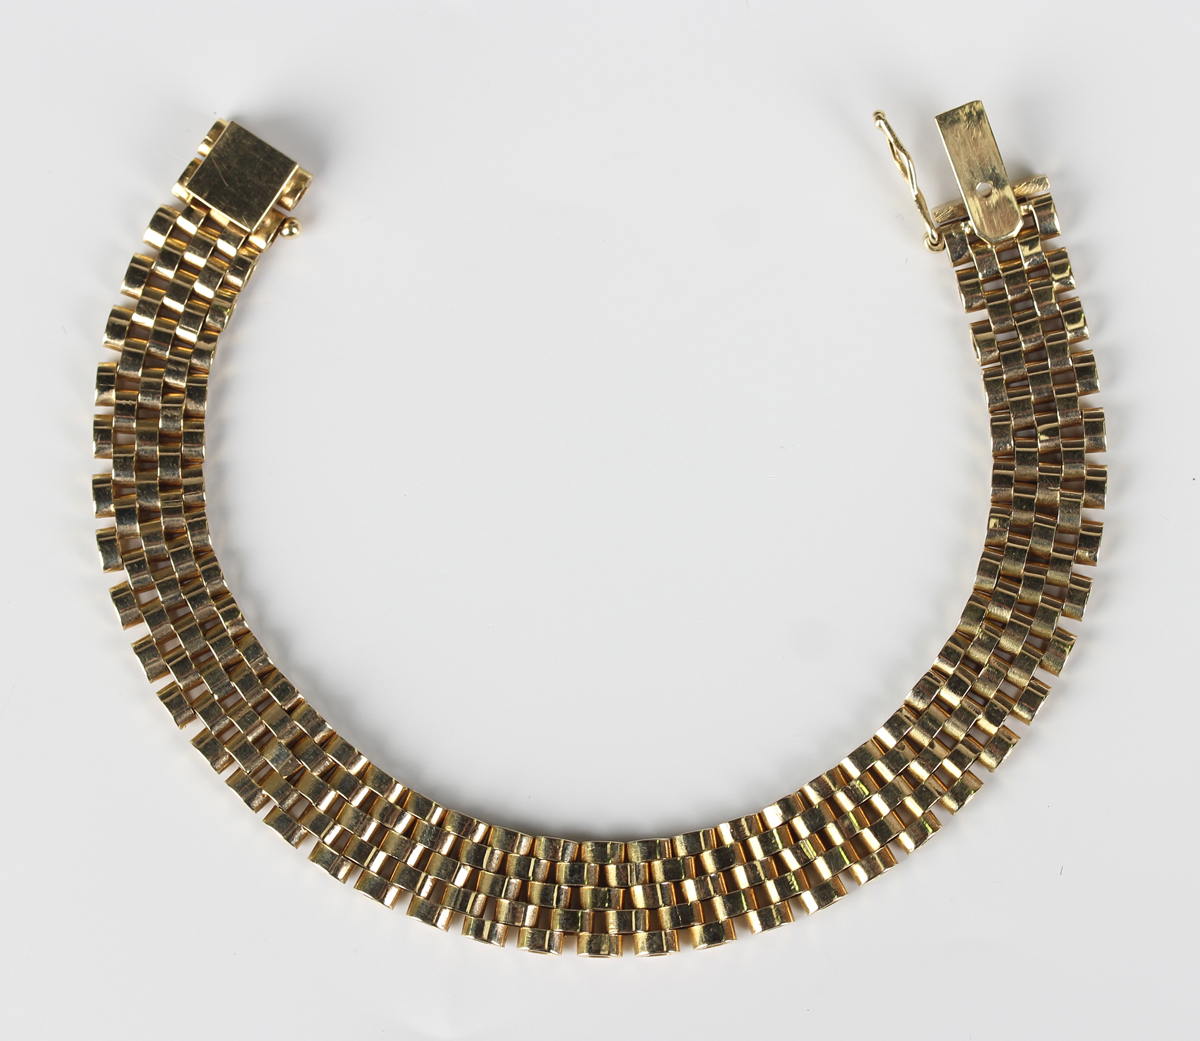 A gold bracelet in a multiple oval link design, on a snap clasp, detailed '585', weight 23.1g, - Image 2 of 2